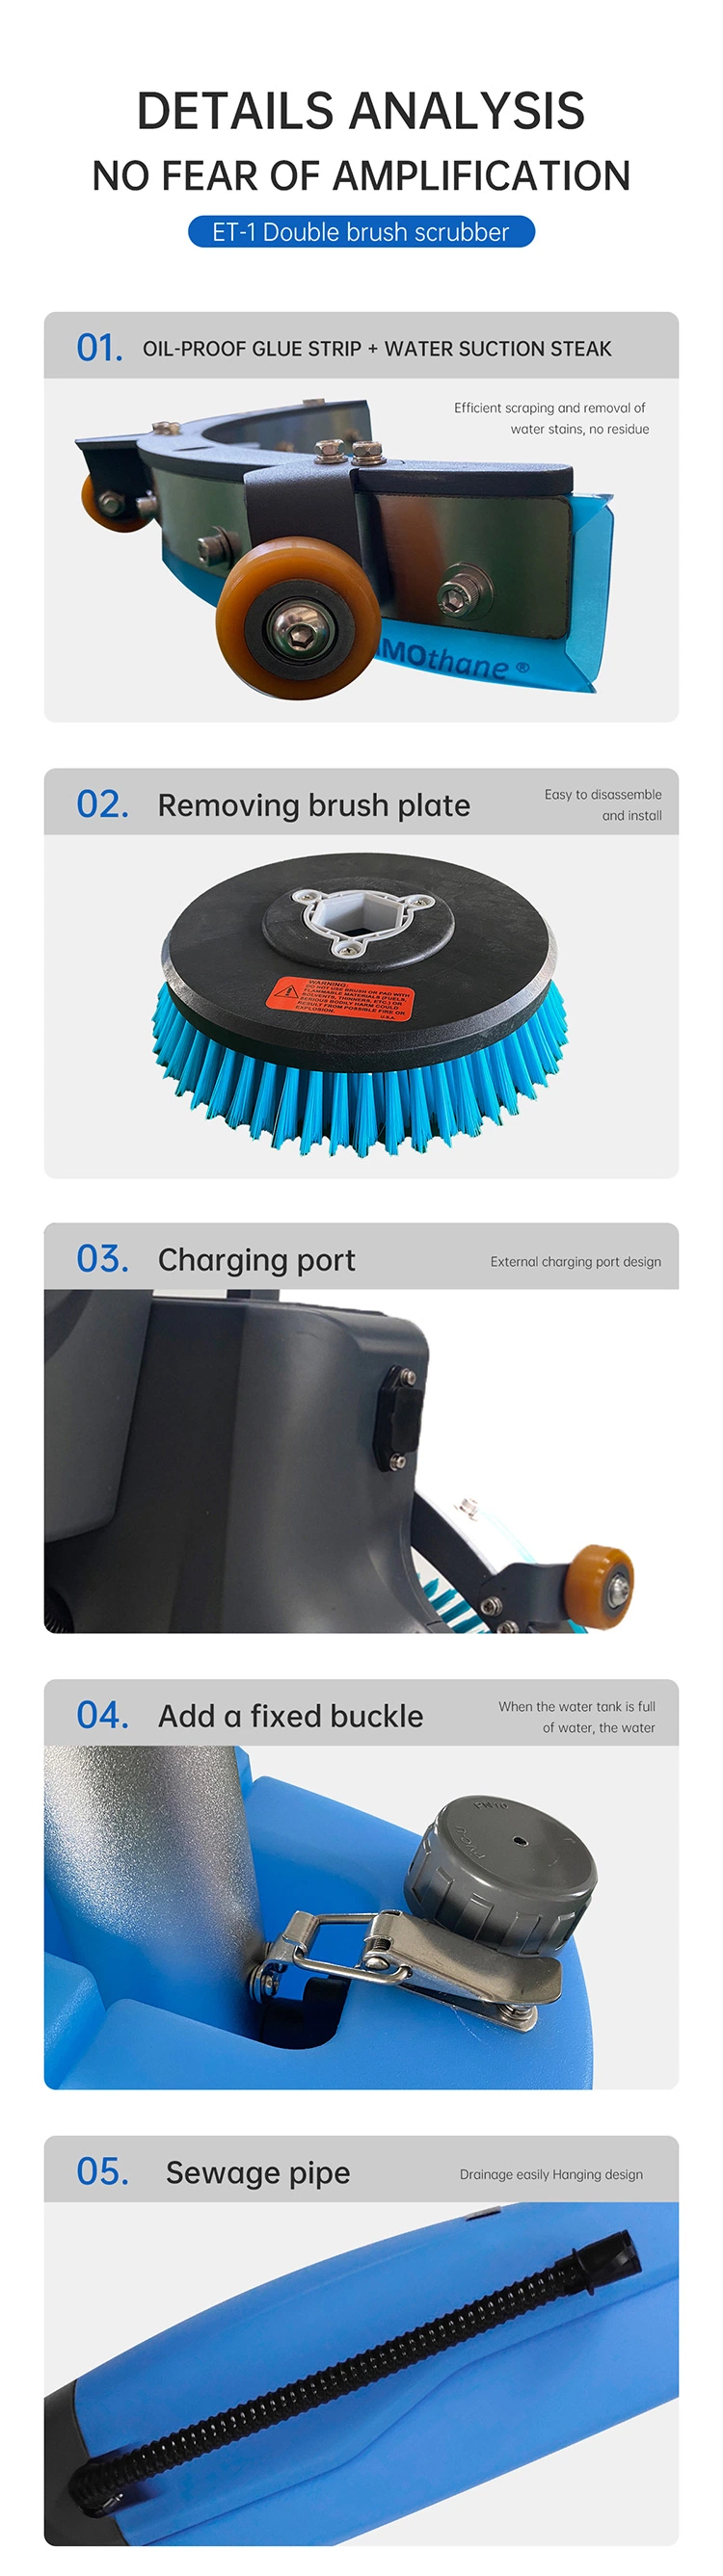 Elerein Et-1 Push-Behind Floor Scrubber for Shopping Mall Office Building Hotel Cleaning with High-Speed Rotating Double Brush